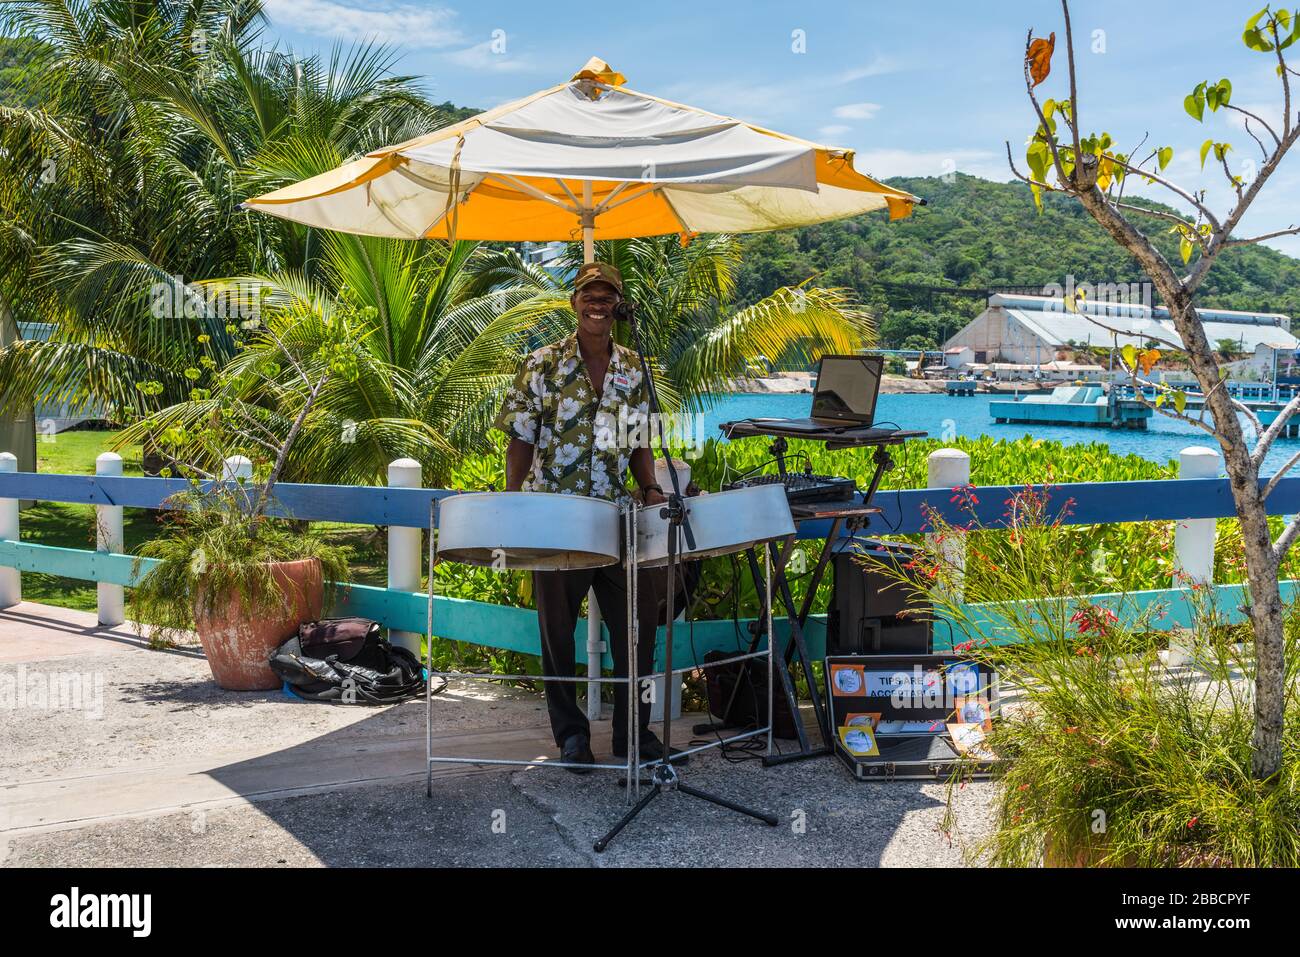 Ocho Rios, Jamaica - April 22, 2019: Local man musician was playing songs on a steel drums near the cruise ship pier in the tropical Caribbean island Stock Photo